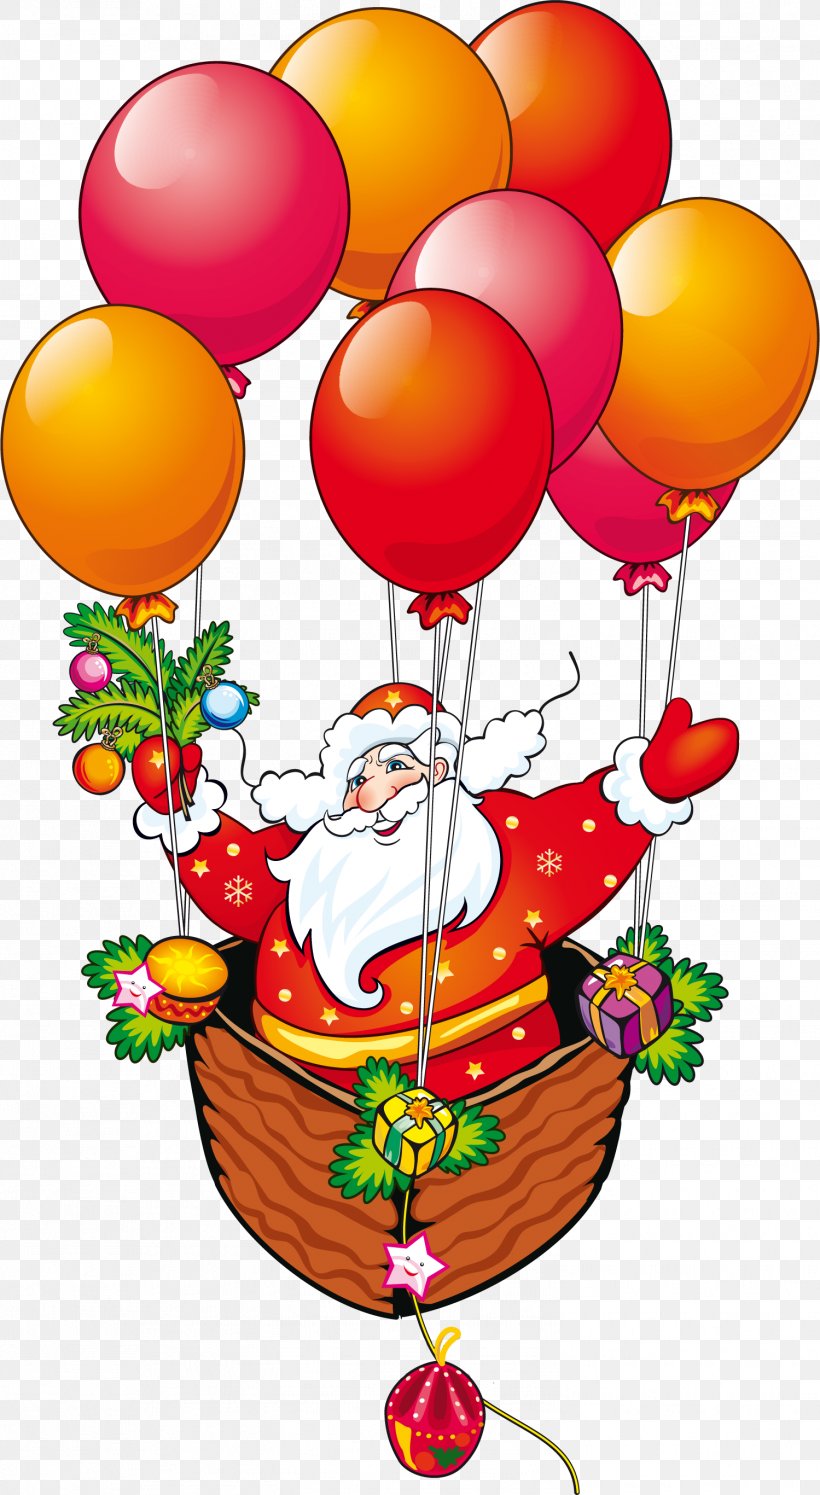 Ded Moroz Snegurochka Santa Claus Clip Art, PNG, 1499x2733px, Ded Moroz, Balloon, Child, Christmas, Fictional Character Download Free